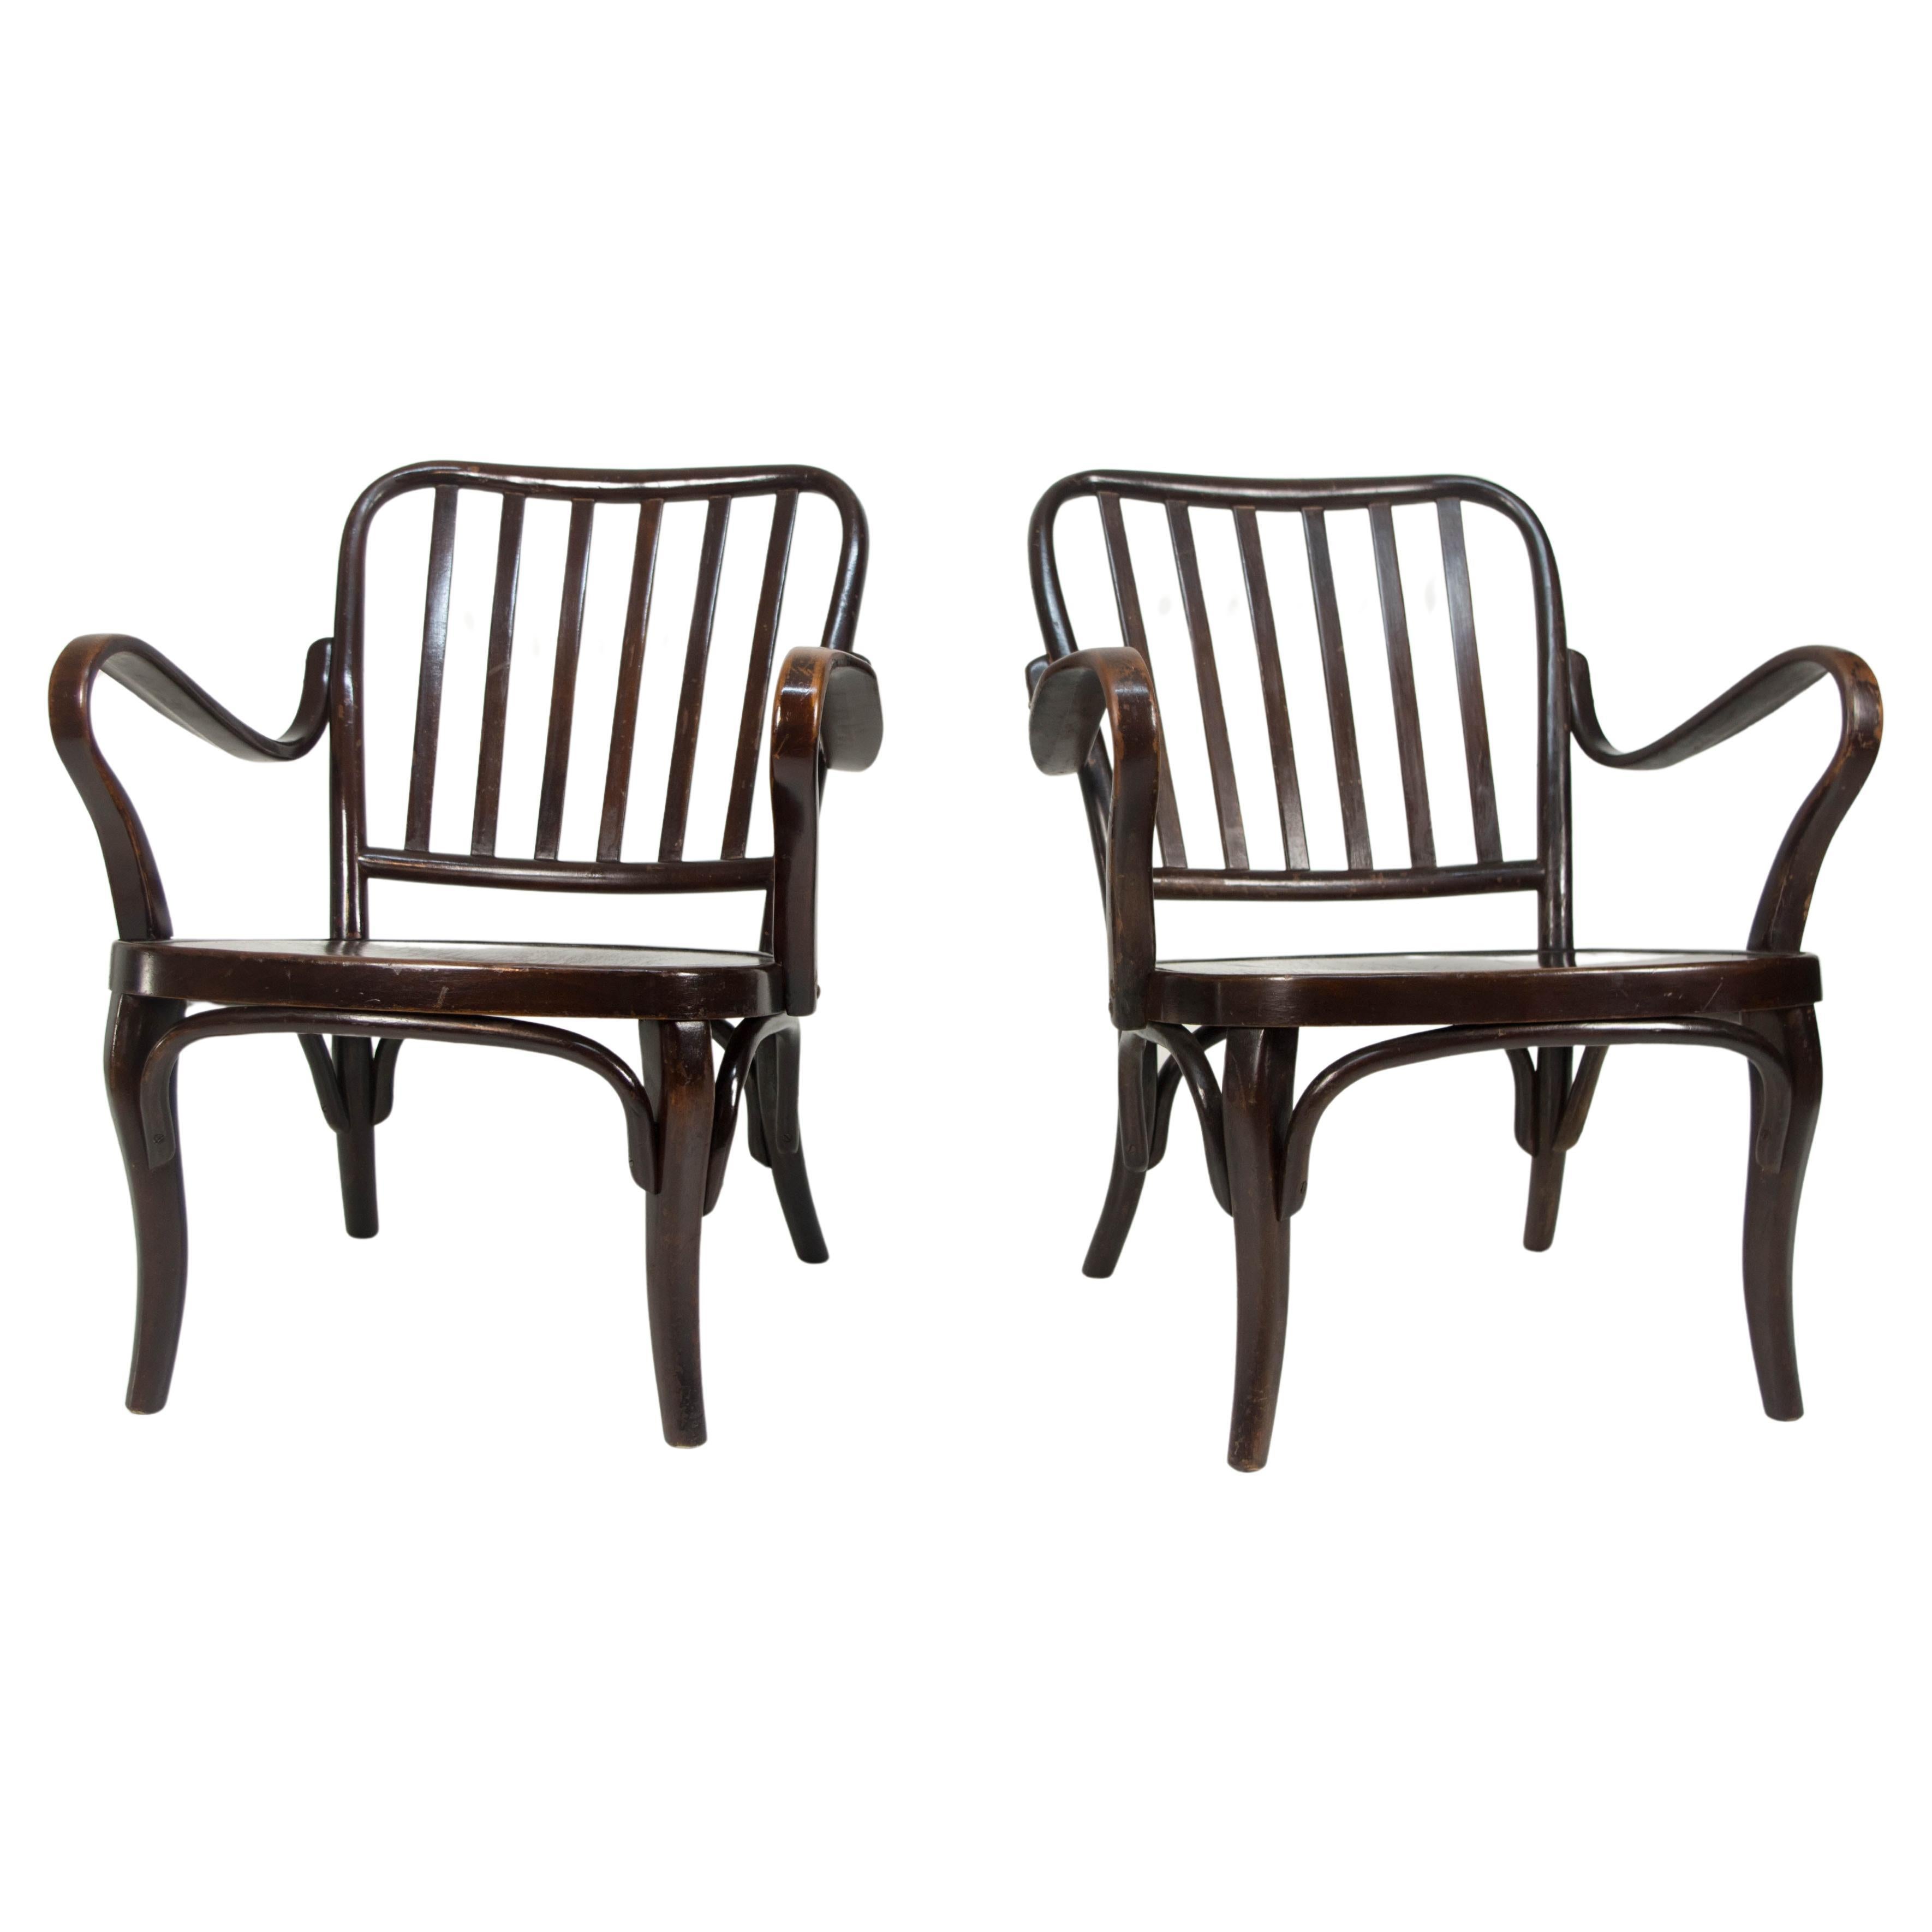 Pair of Armchairs No. 752 by Josef Frank for Thonet, 1930s